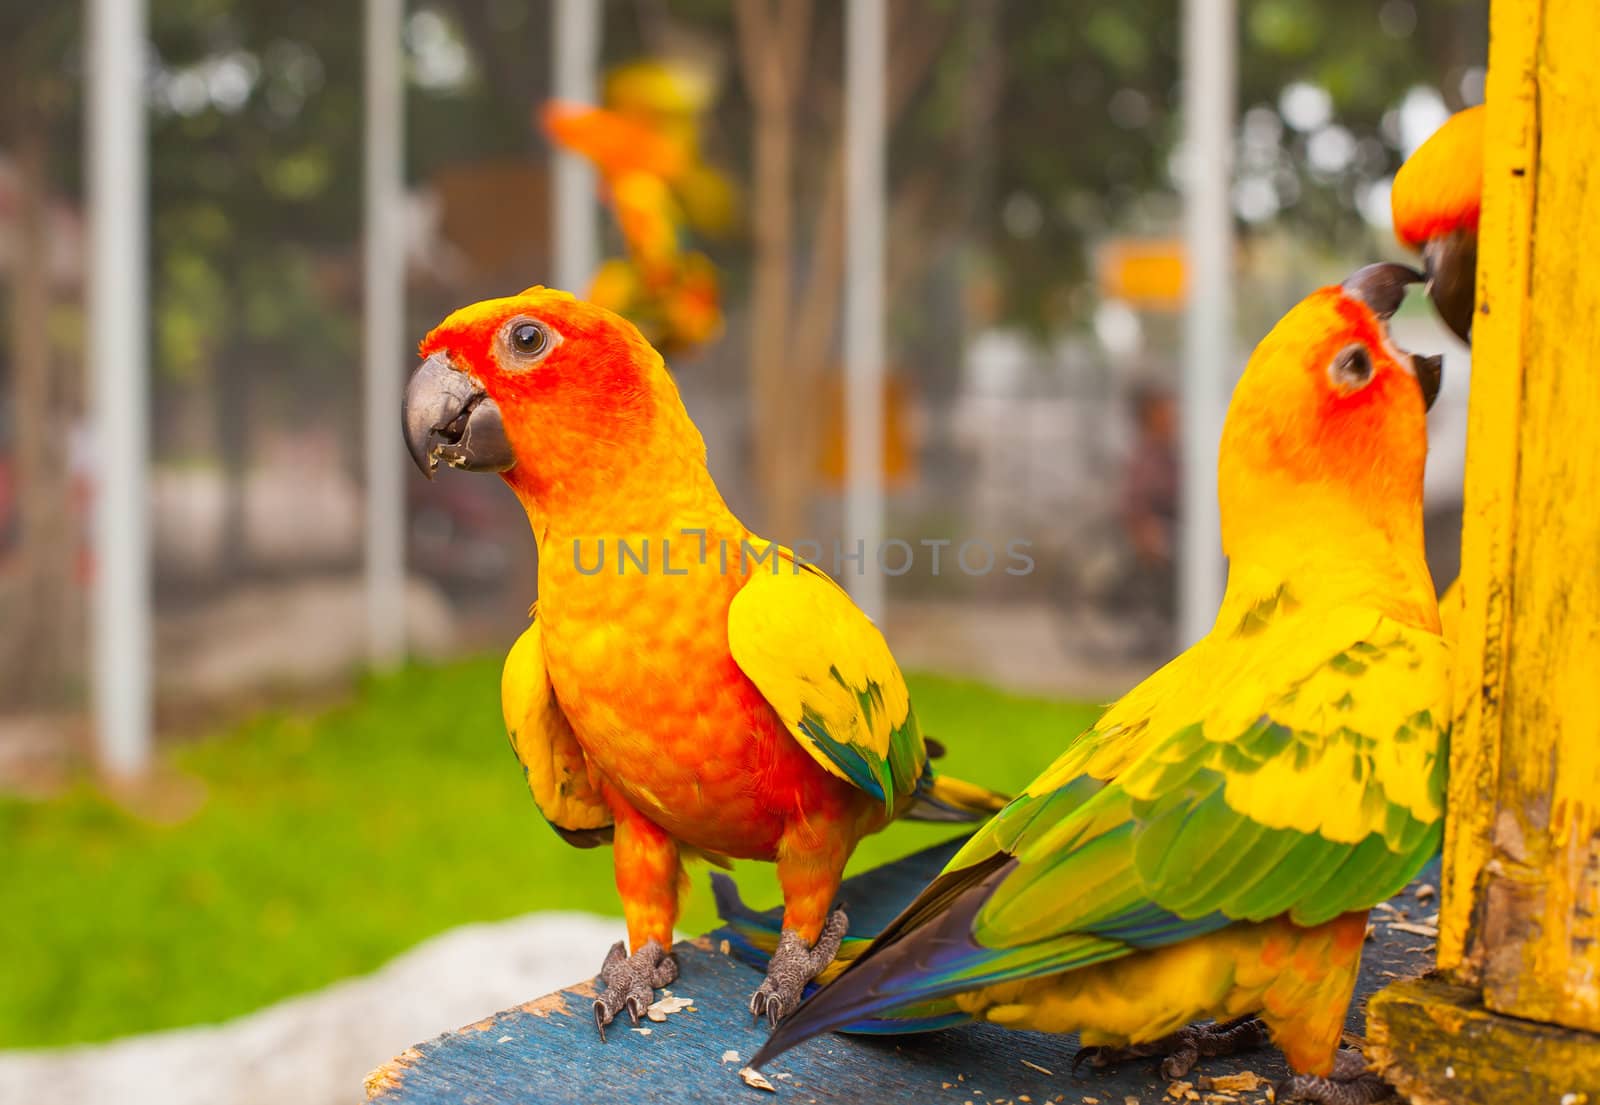 yellow parrots are seatting on the branch